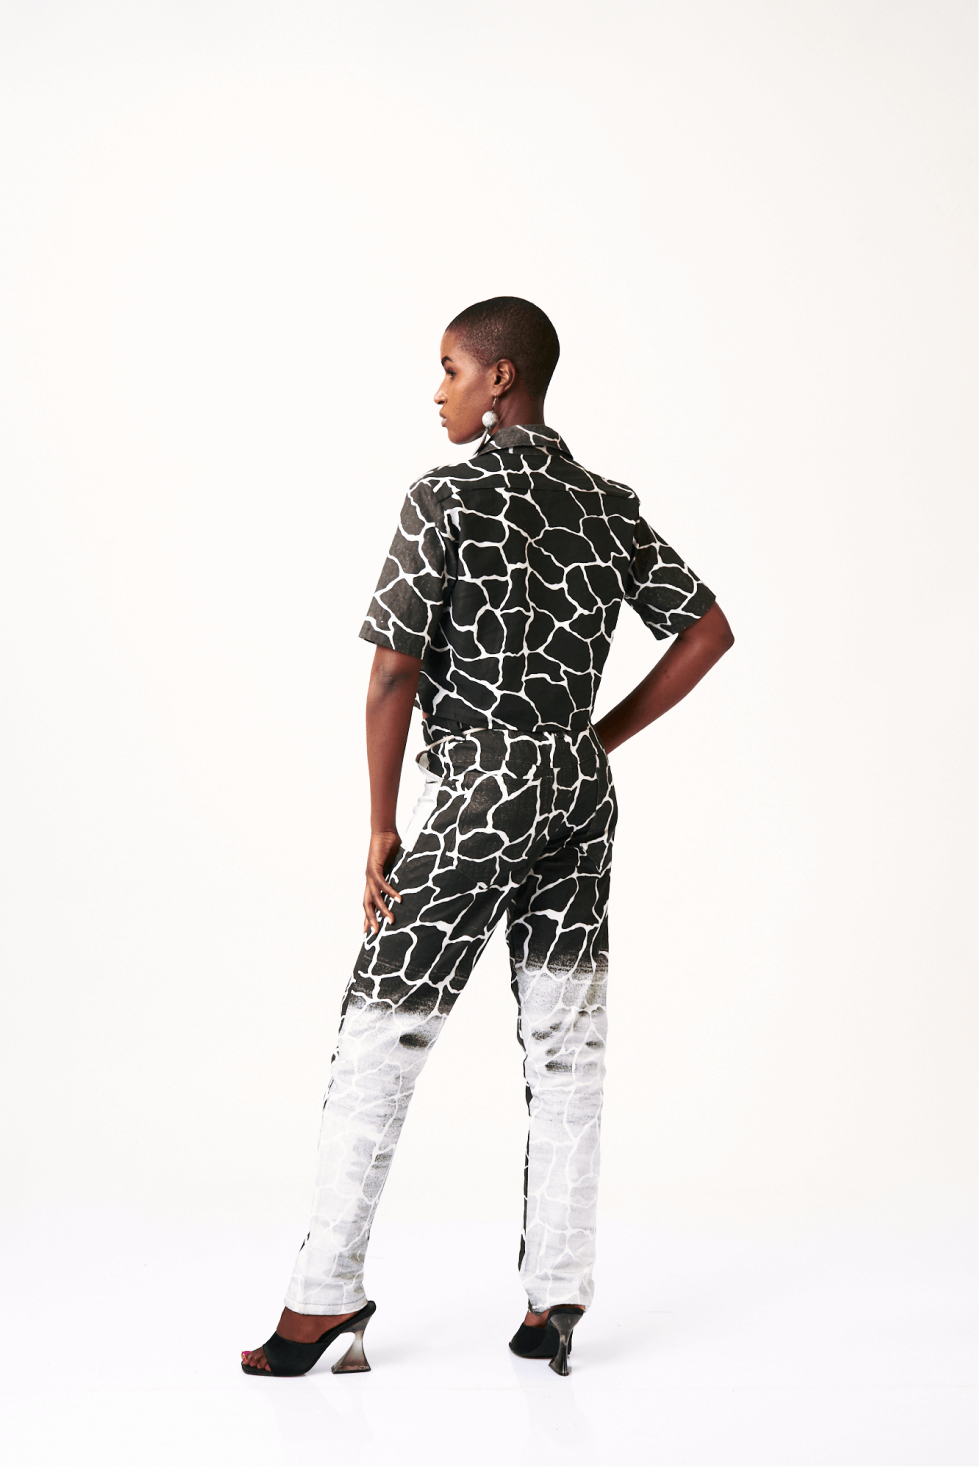 Shop Twiga Print Top by Nairobi Apparel District on Arrai. Discover stylish, affordable clothing, jewelry, handbags and unique handmade pieces from top Kenyan & African fashion brands prioritising sustainability and quality craftsmanship.